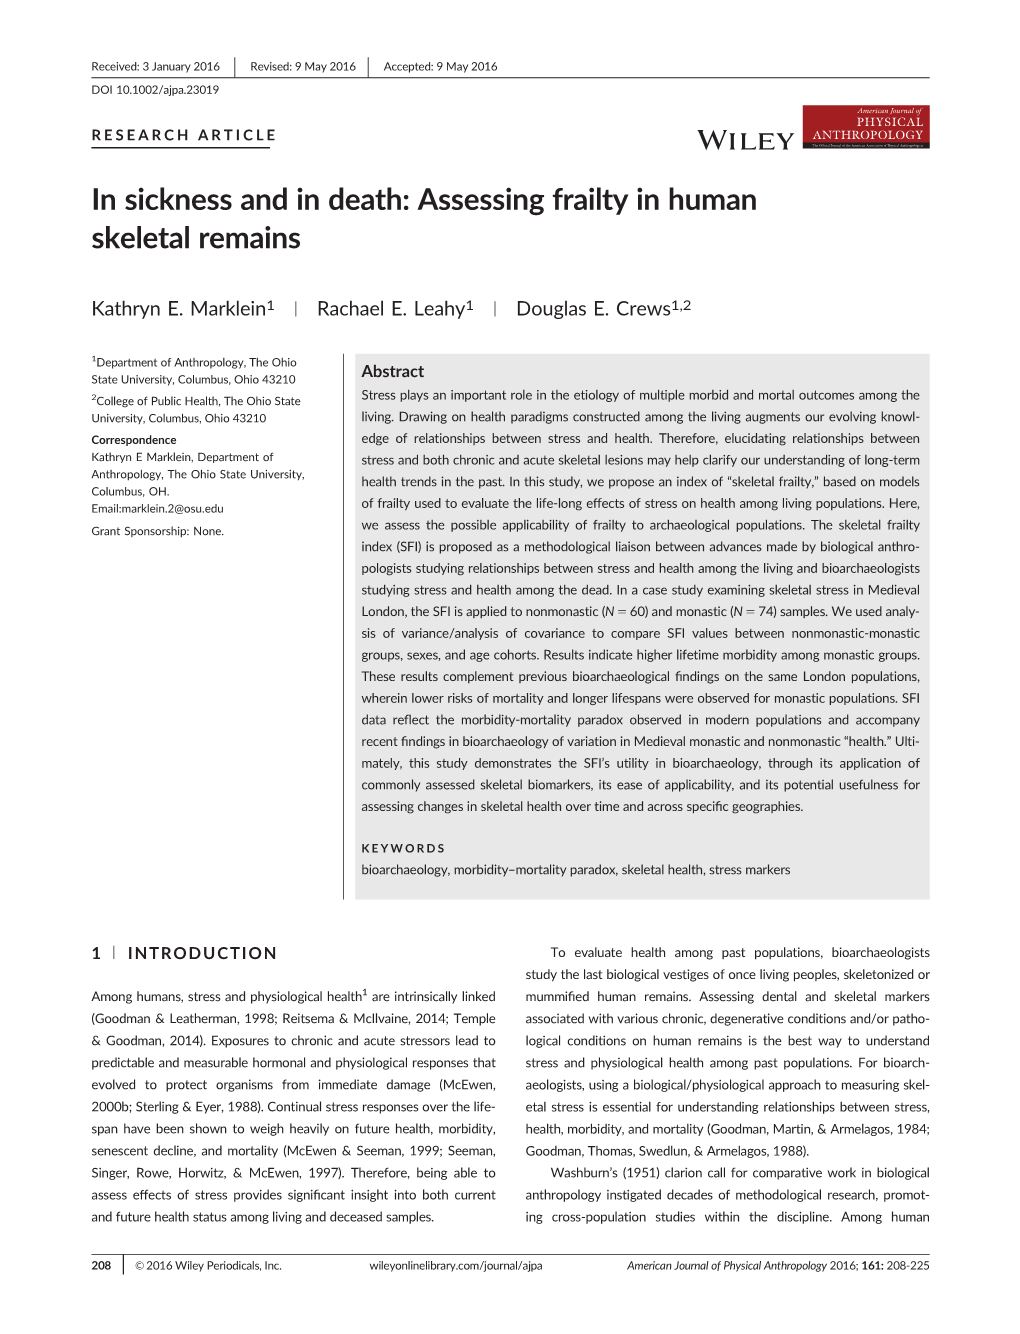 In Sickness and in Death: Assessing Frailty in Human Skeletal Remains